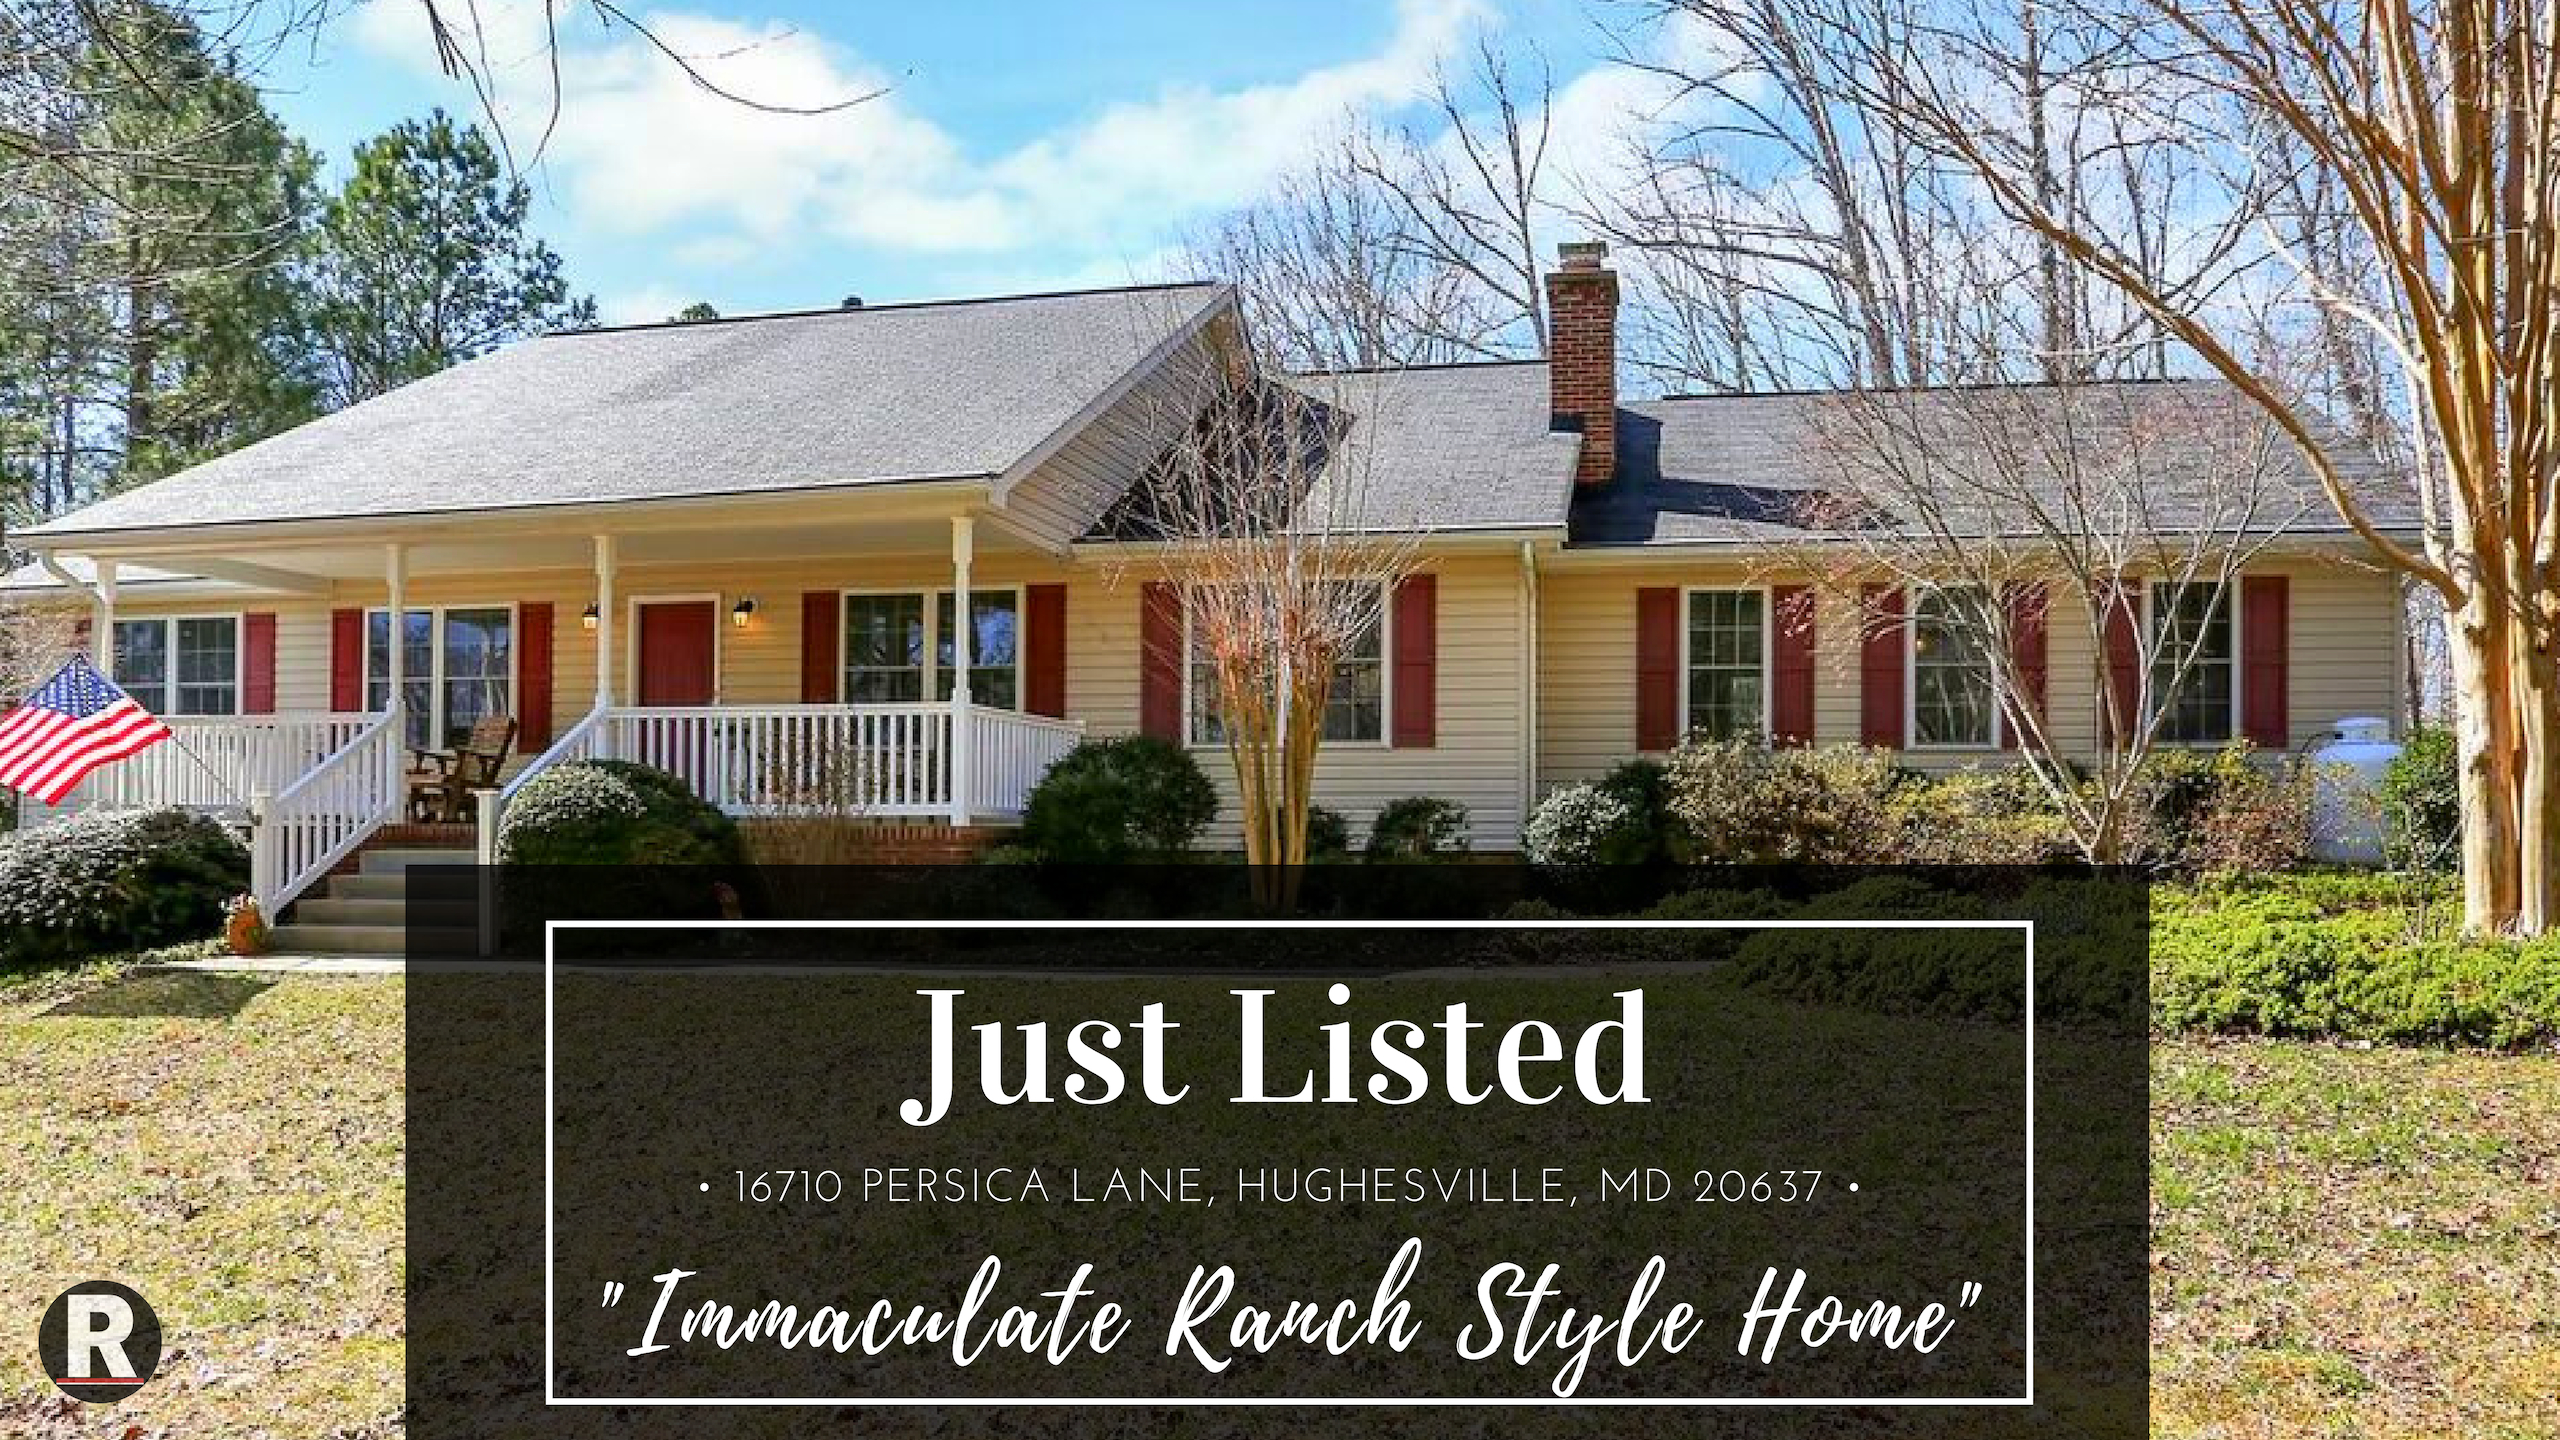 Just Listed! 16710 Persica Lane, Hughesville, MD 20637